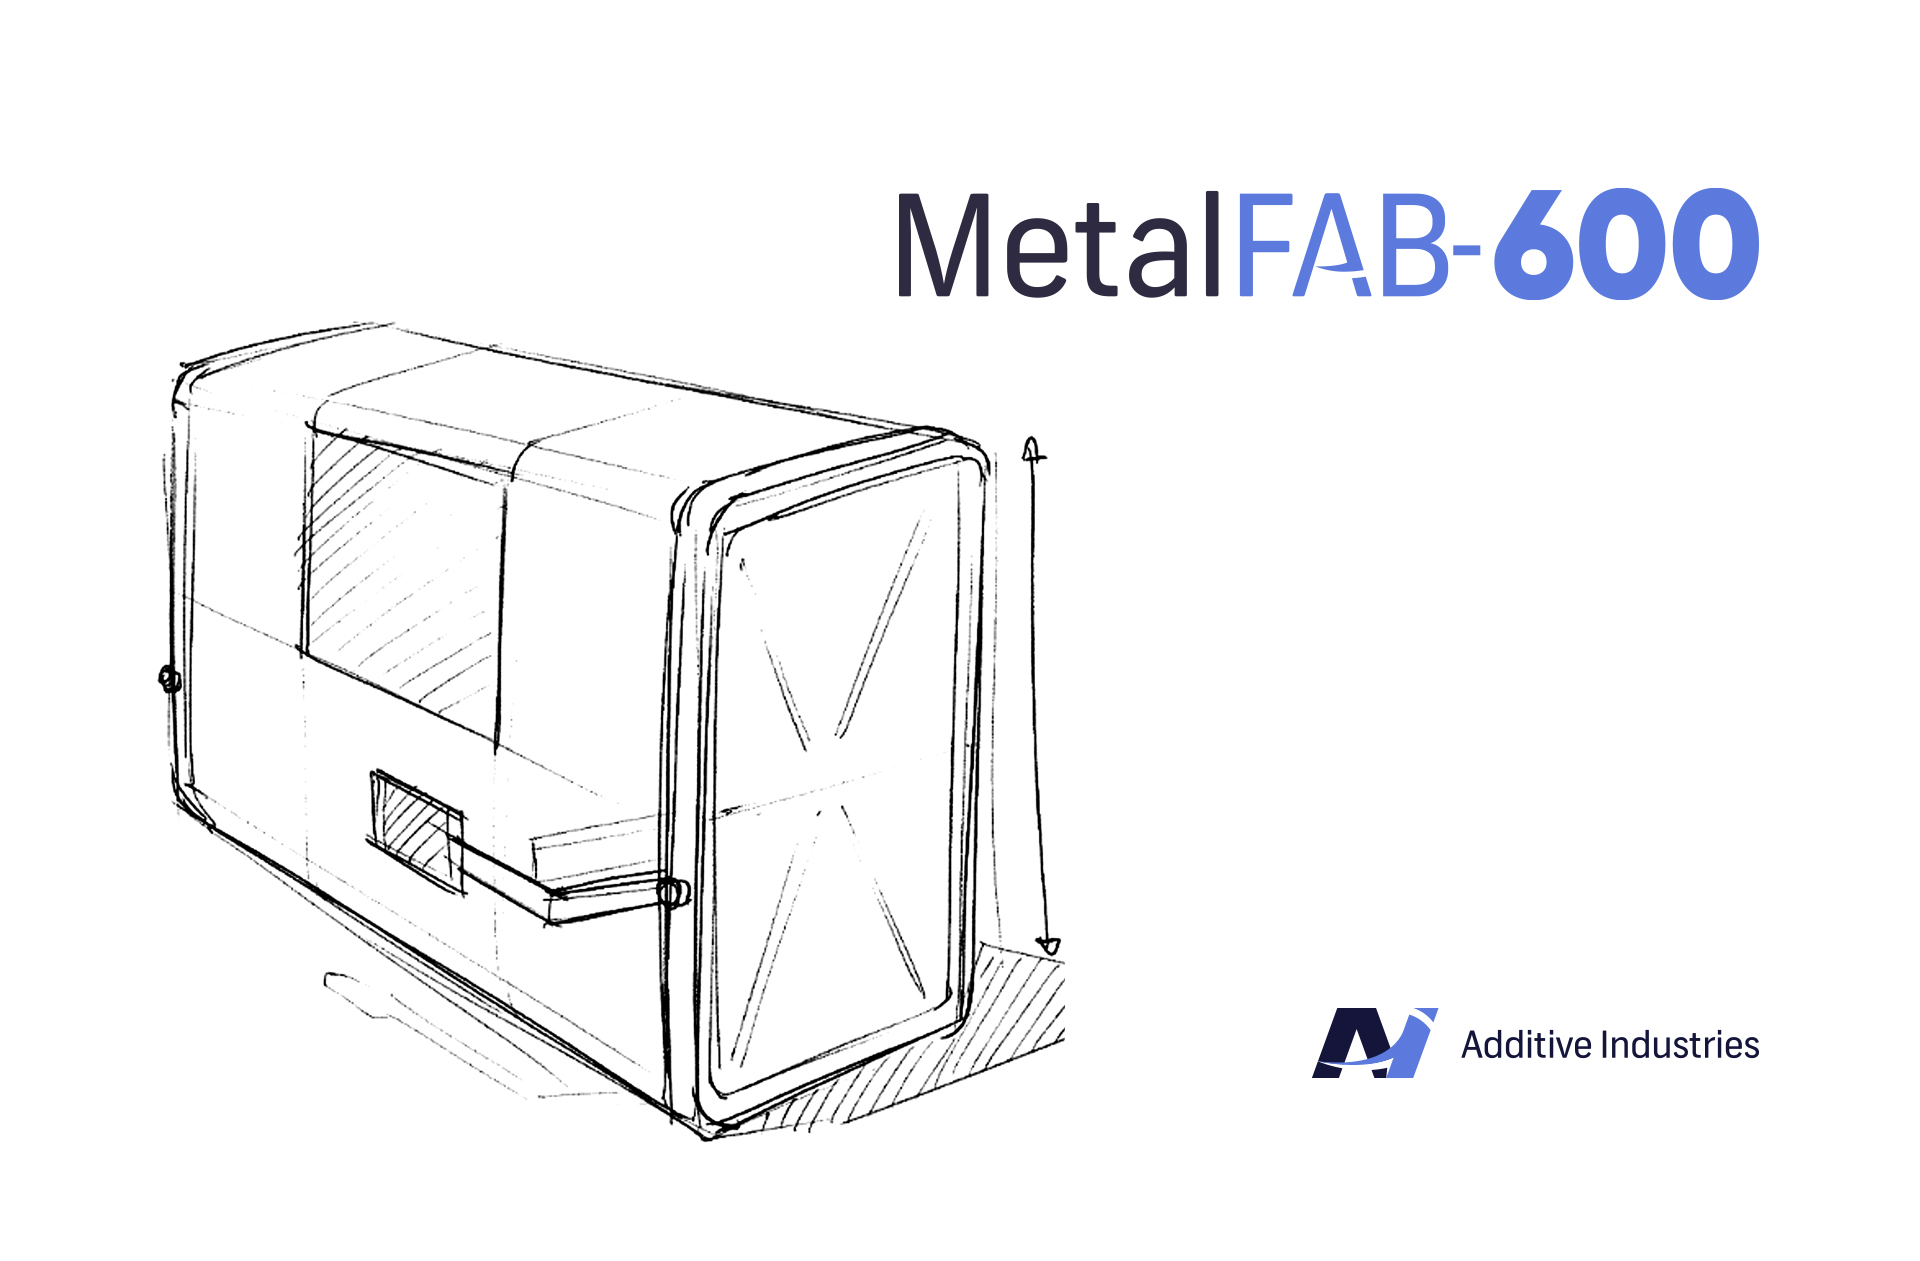 Additive Industries will officially present the MetalFAB-600 towards the end of 2021. Image via Additive Industries.